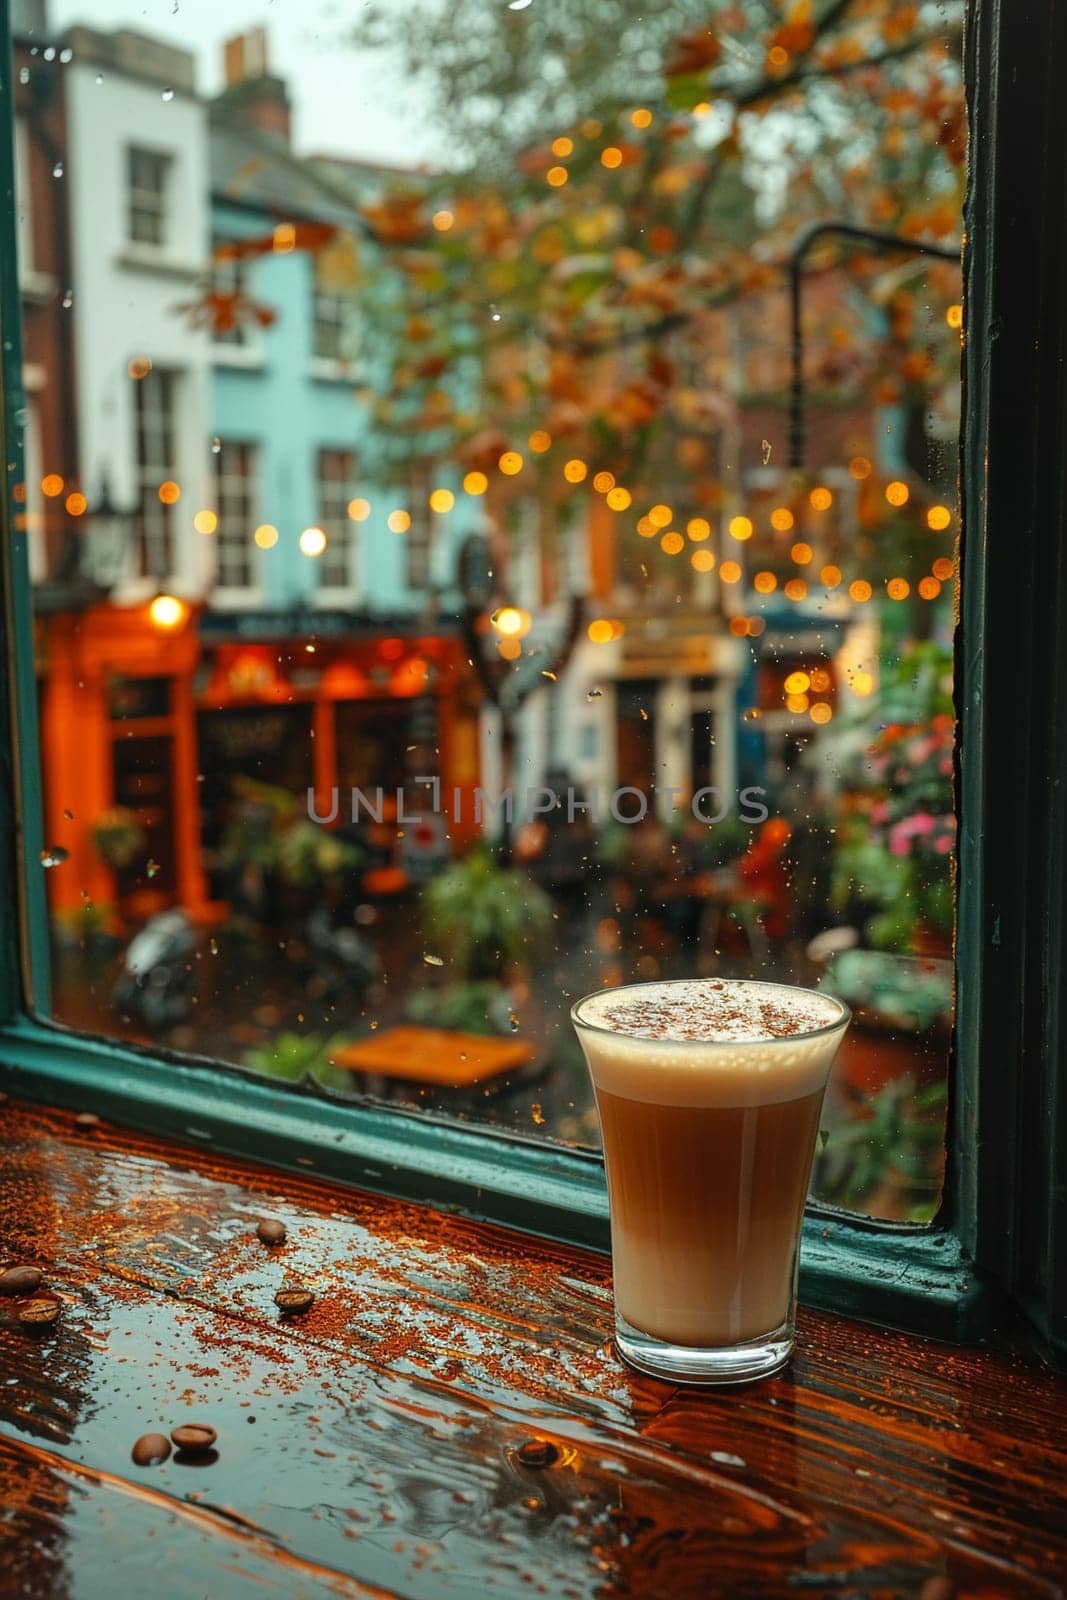 Irish Coffee in a Dublin cafe, with a backdrop of rain-streaked windows and literary history.